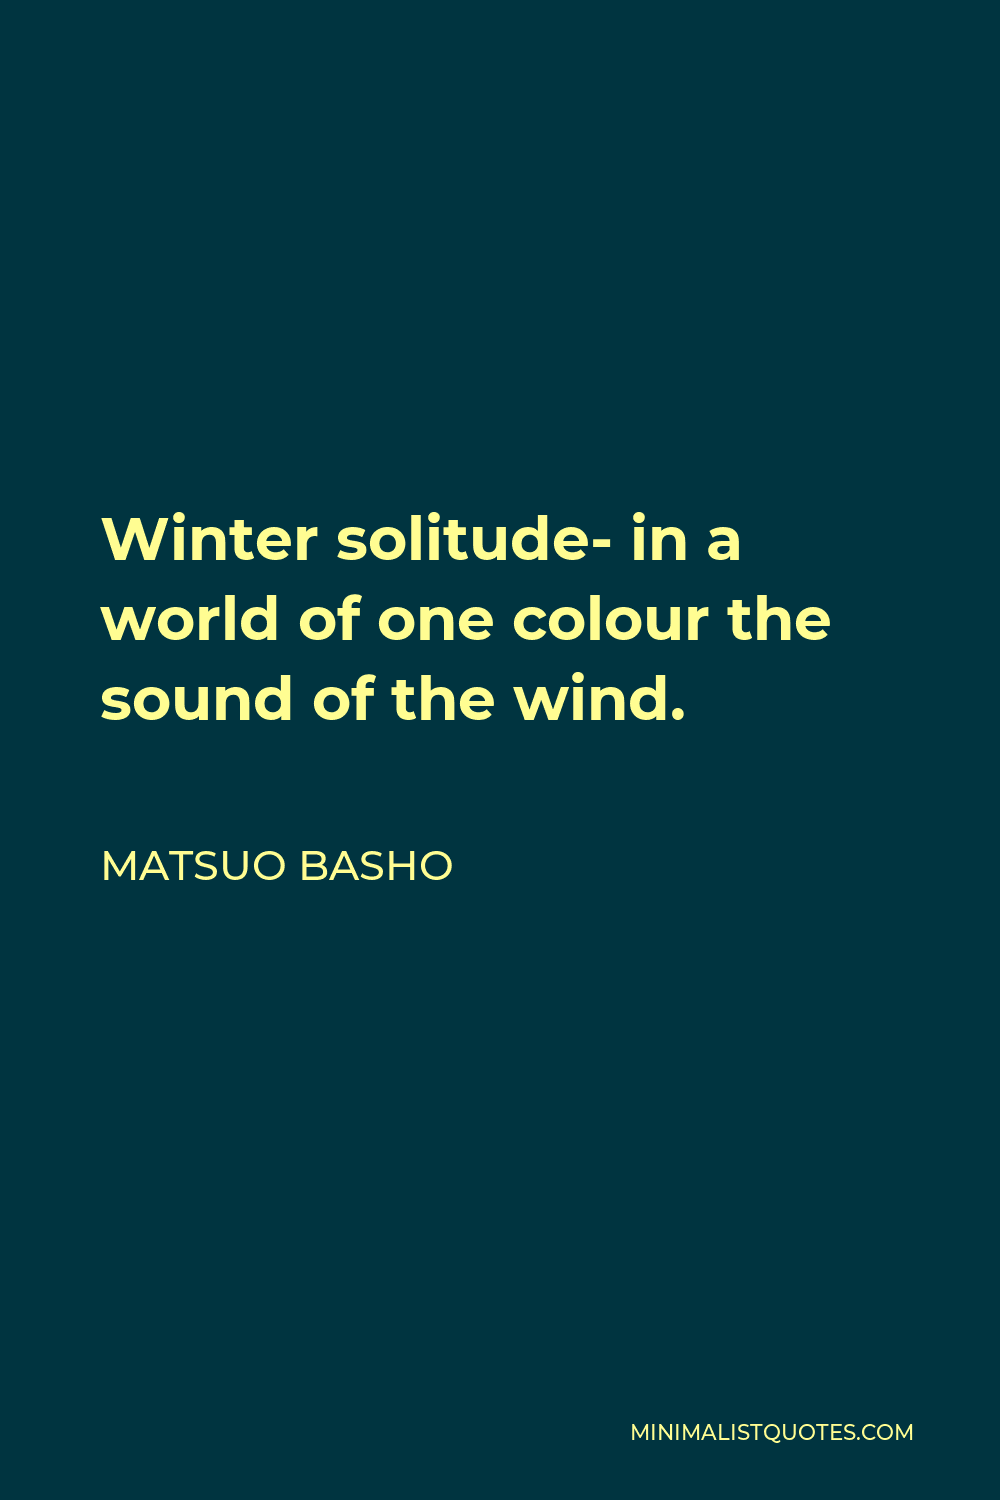 Matsuo Basho Quote - Winter solitude- in a world of one colour the sound of the wind.